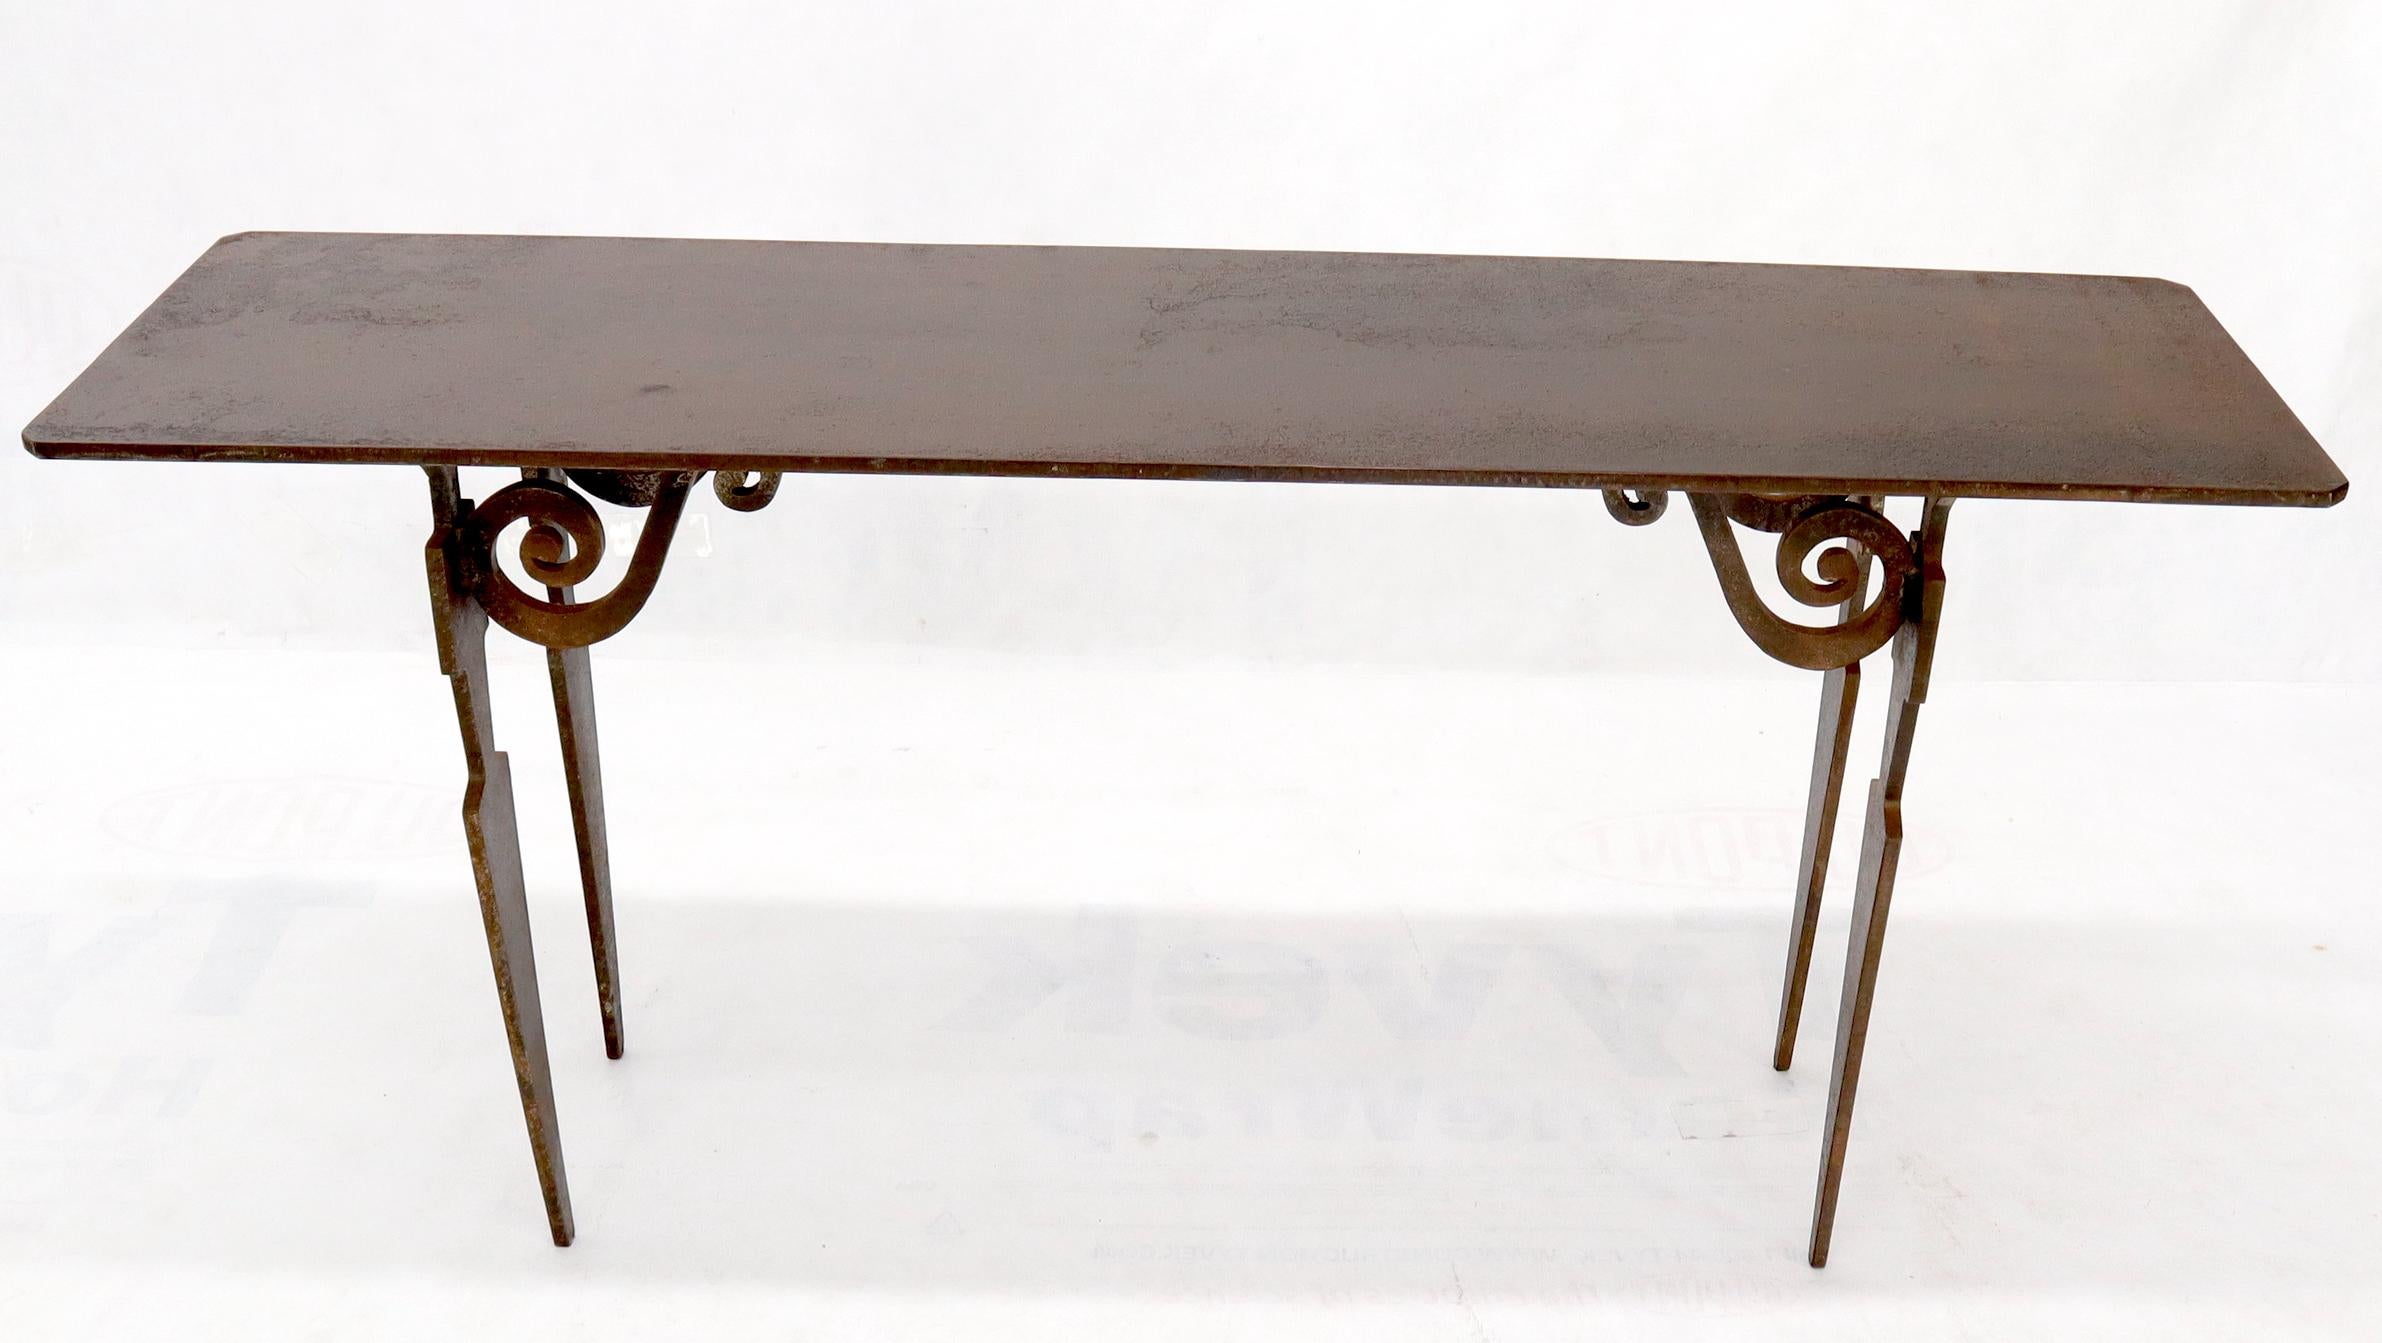 Carved Thick Solid Steel Plate Top Cut Steel Legs Coffee Table Steam Punk Console Table For Sale